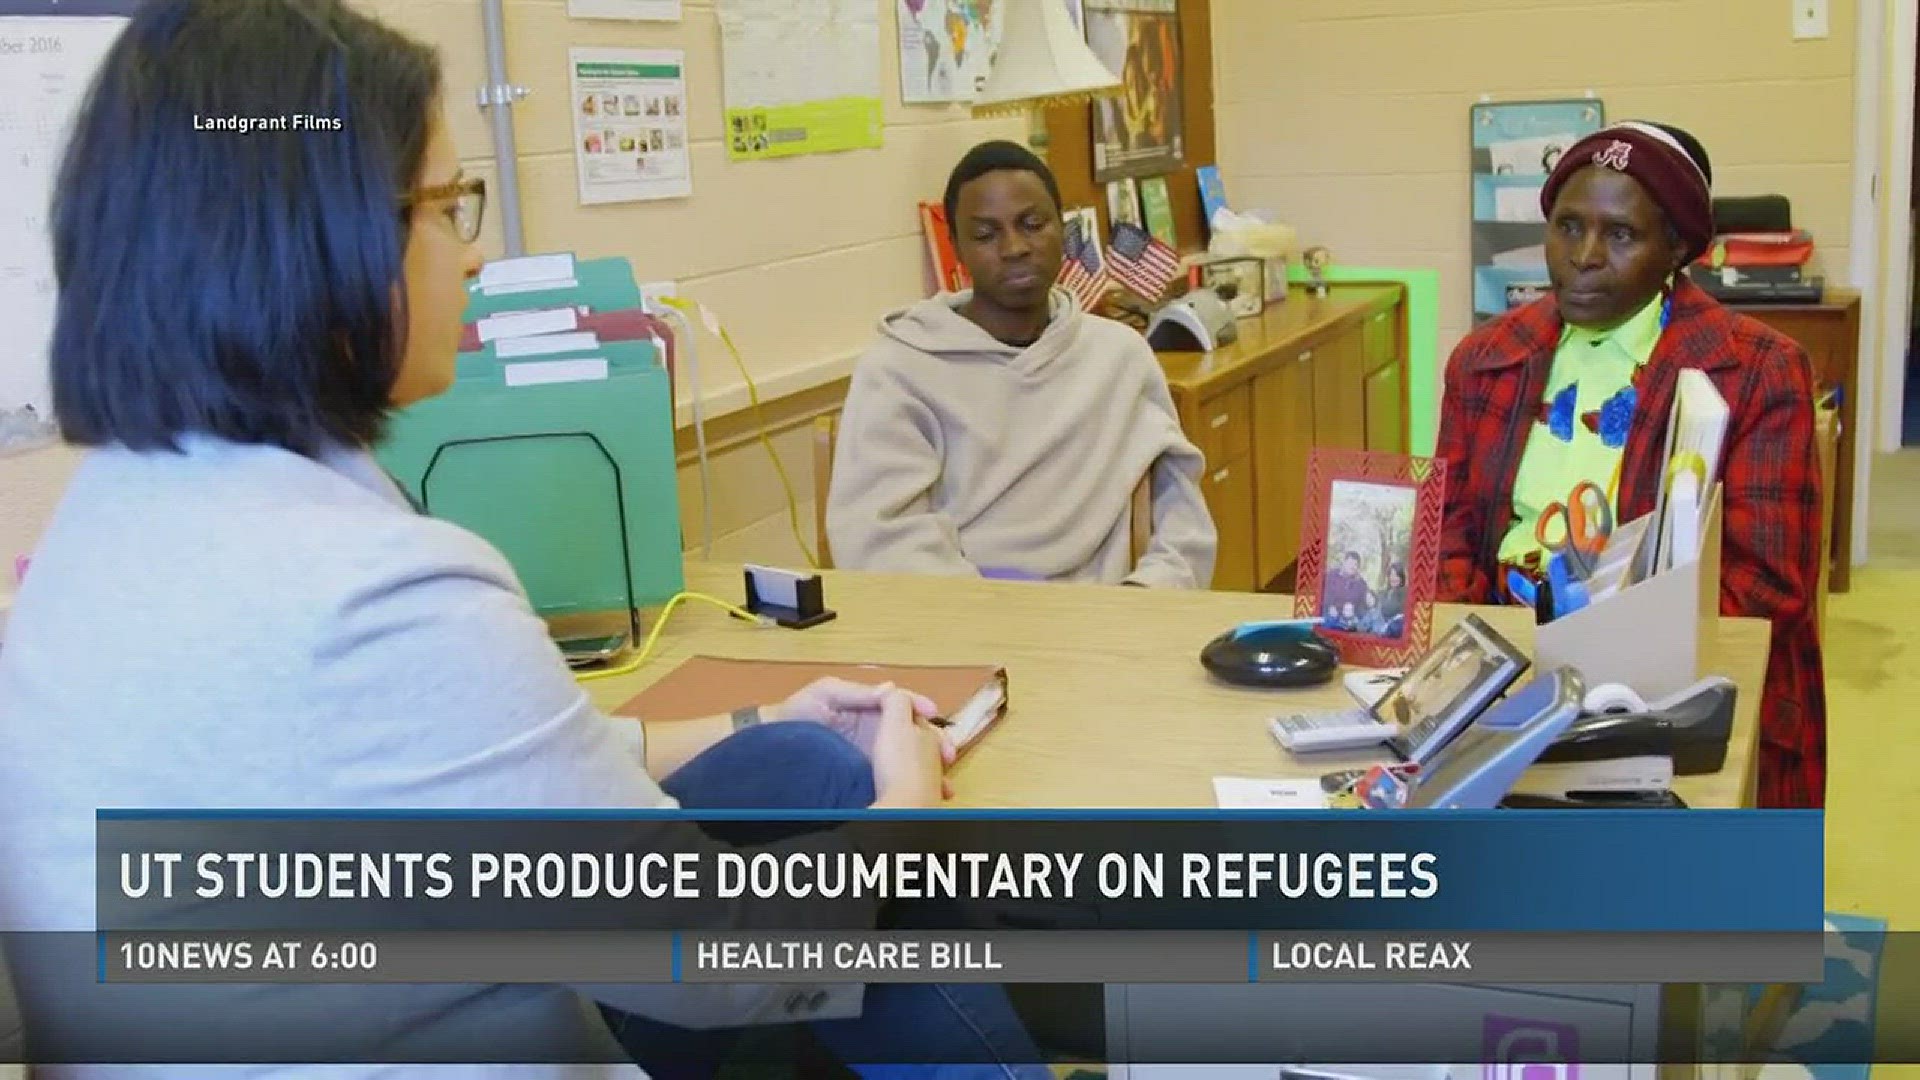 June 22, 2017: About 250 people fleeing persecution from around the world will resettle in East Tennessee this year. A team of UT journalism students and their professor are telling those refugees' stories in a new documentary.